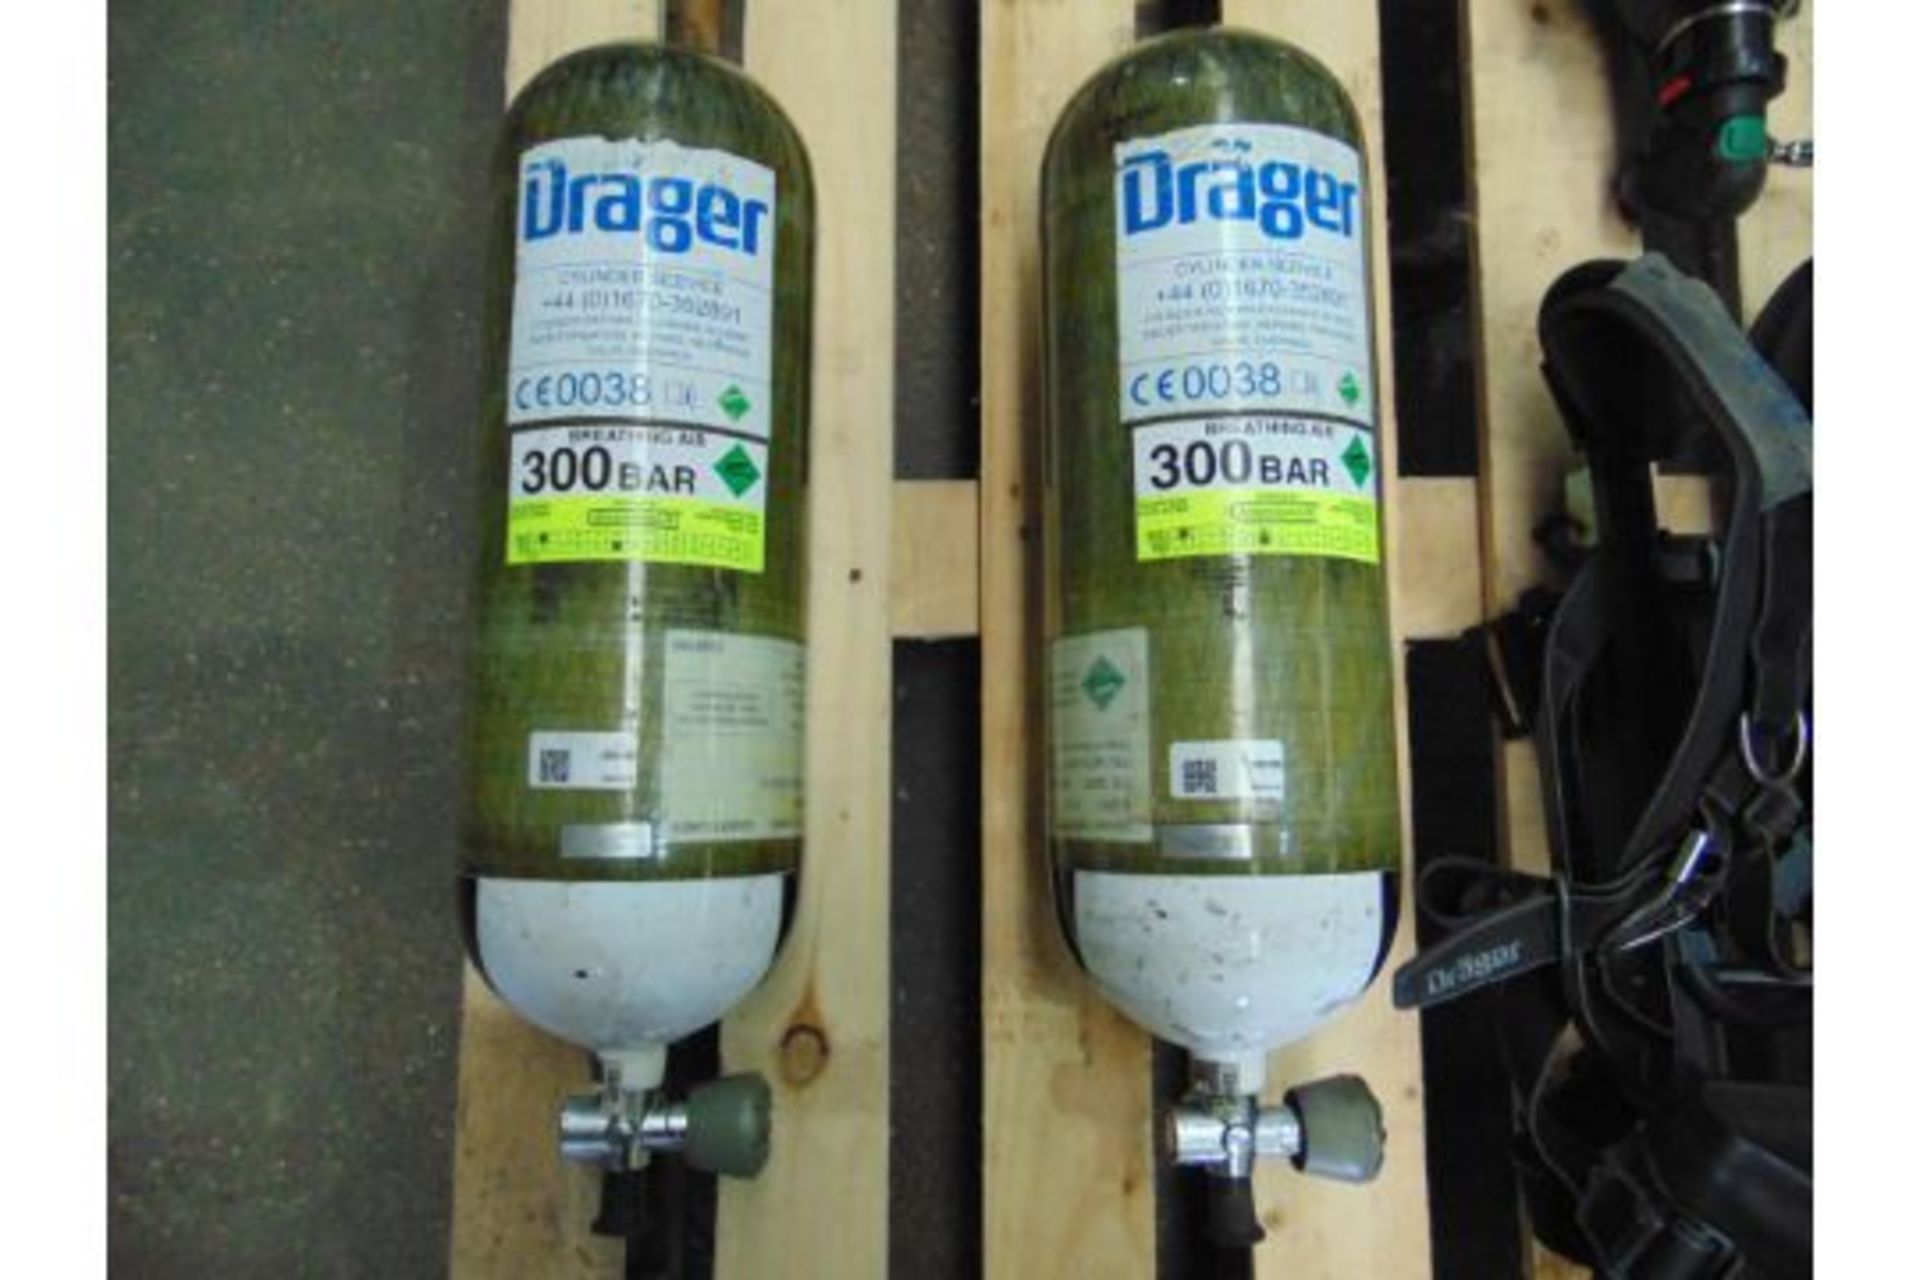 Drager PSS 7000 Self Contained Breathing Apparatus w/ 2 x Drager 300 Bar Air Cylinders - Image 2 of 22